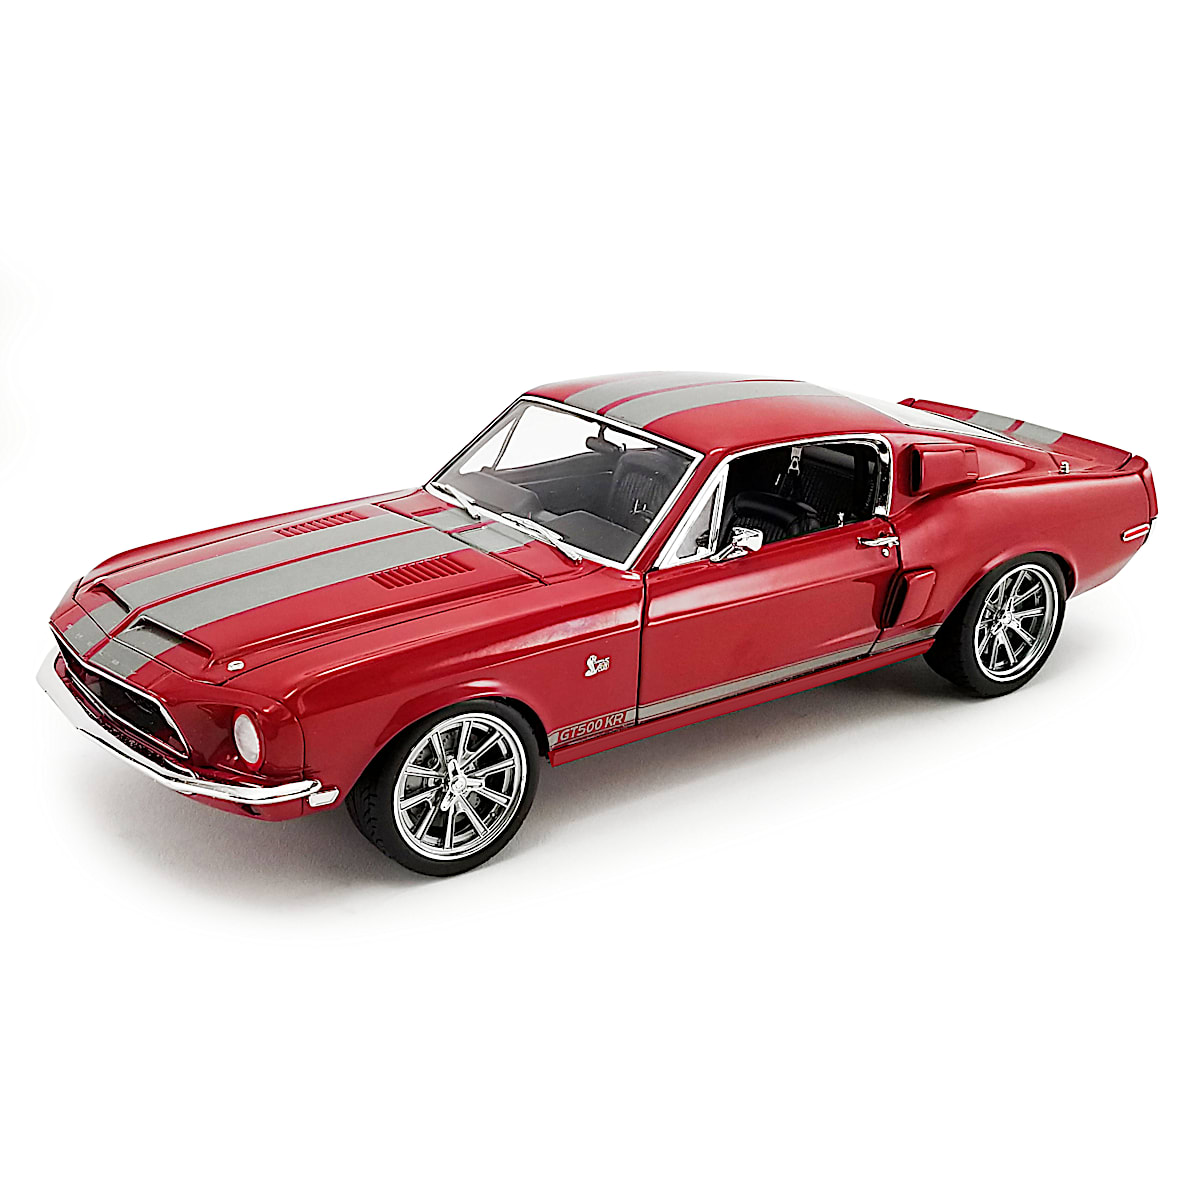 1:18-Scale 1968 Shelby Cobra GT500 KR Restomod Diecast Car Featuring A ...